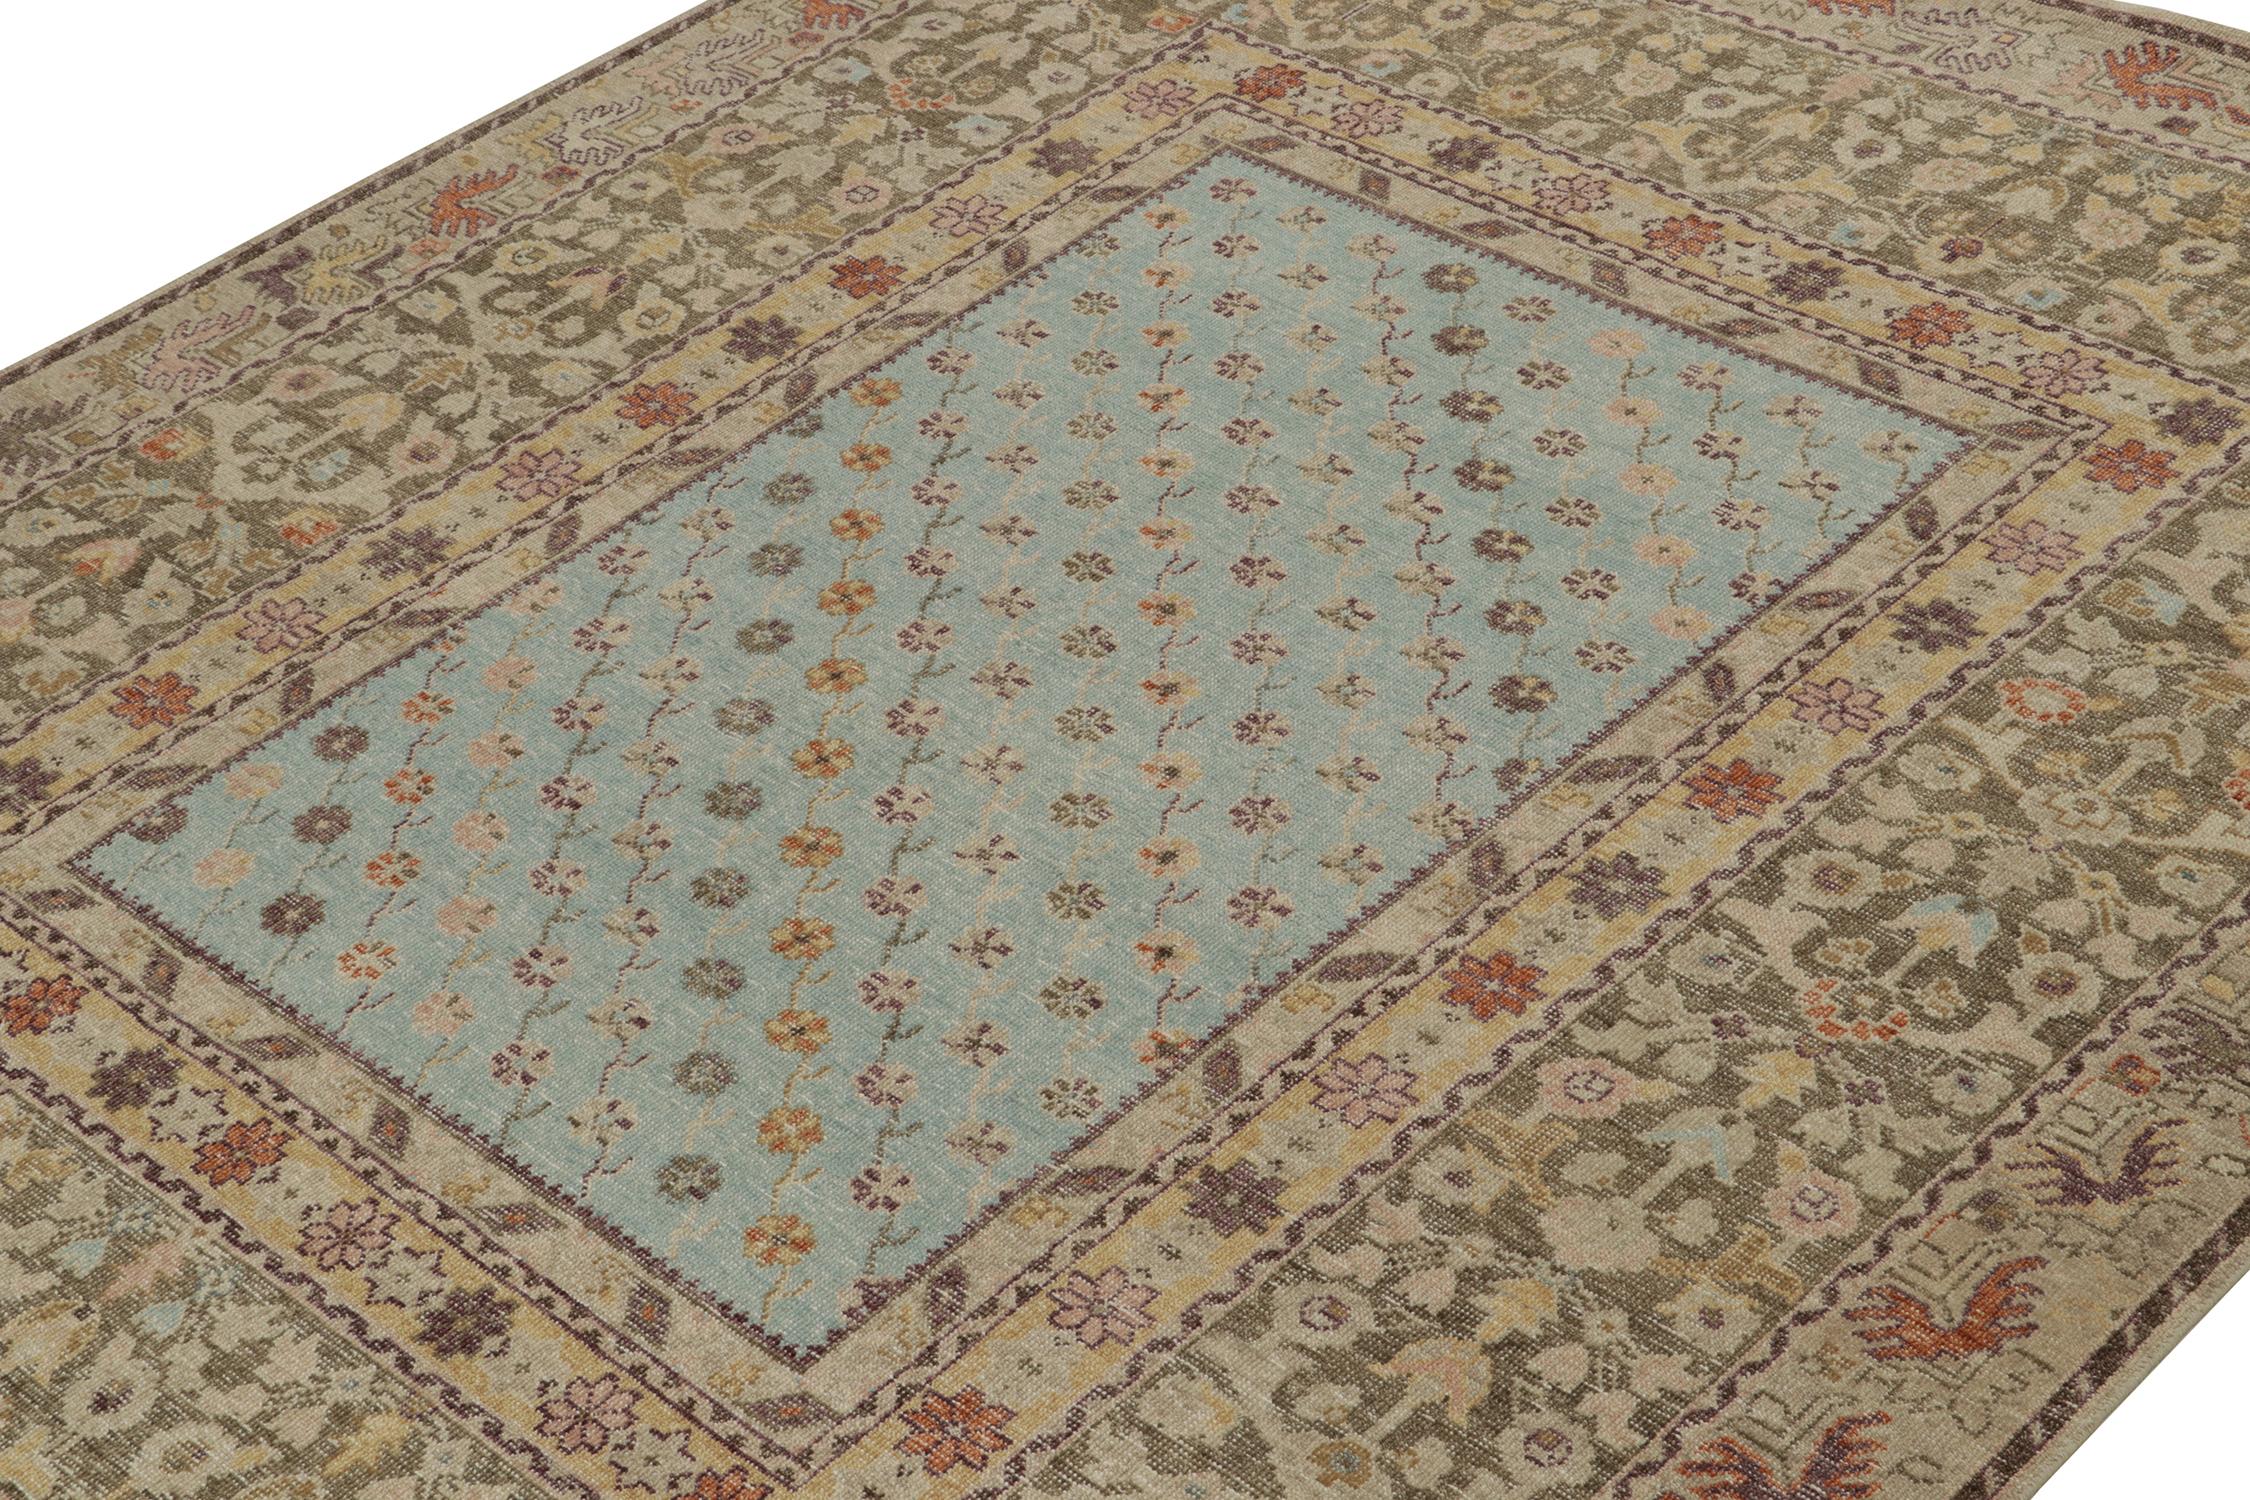 Indian Rug & Kilim’s Distressed Style Rug in Blue and Green with Floral Patterns For Sale